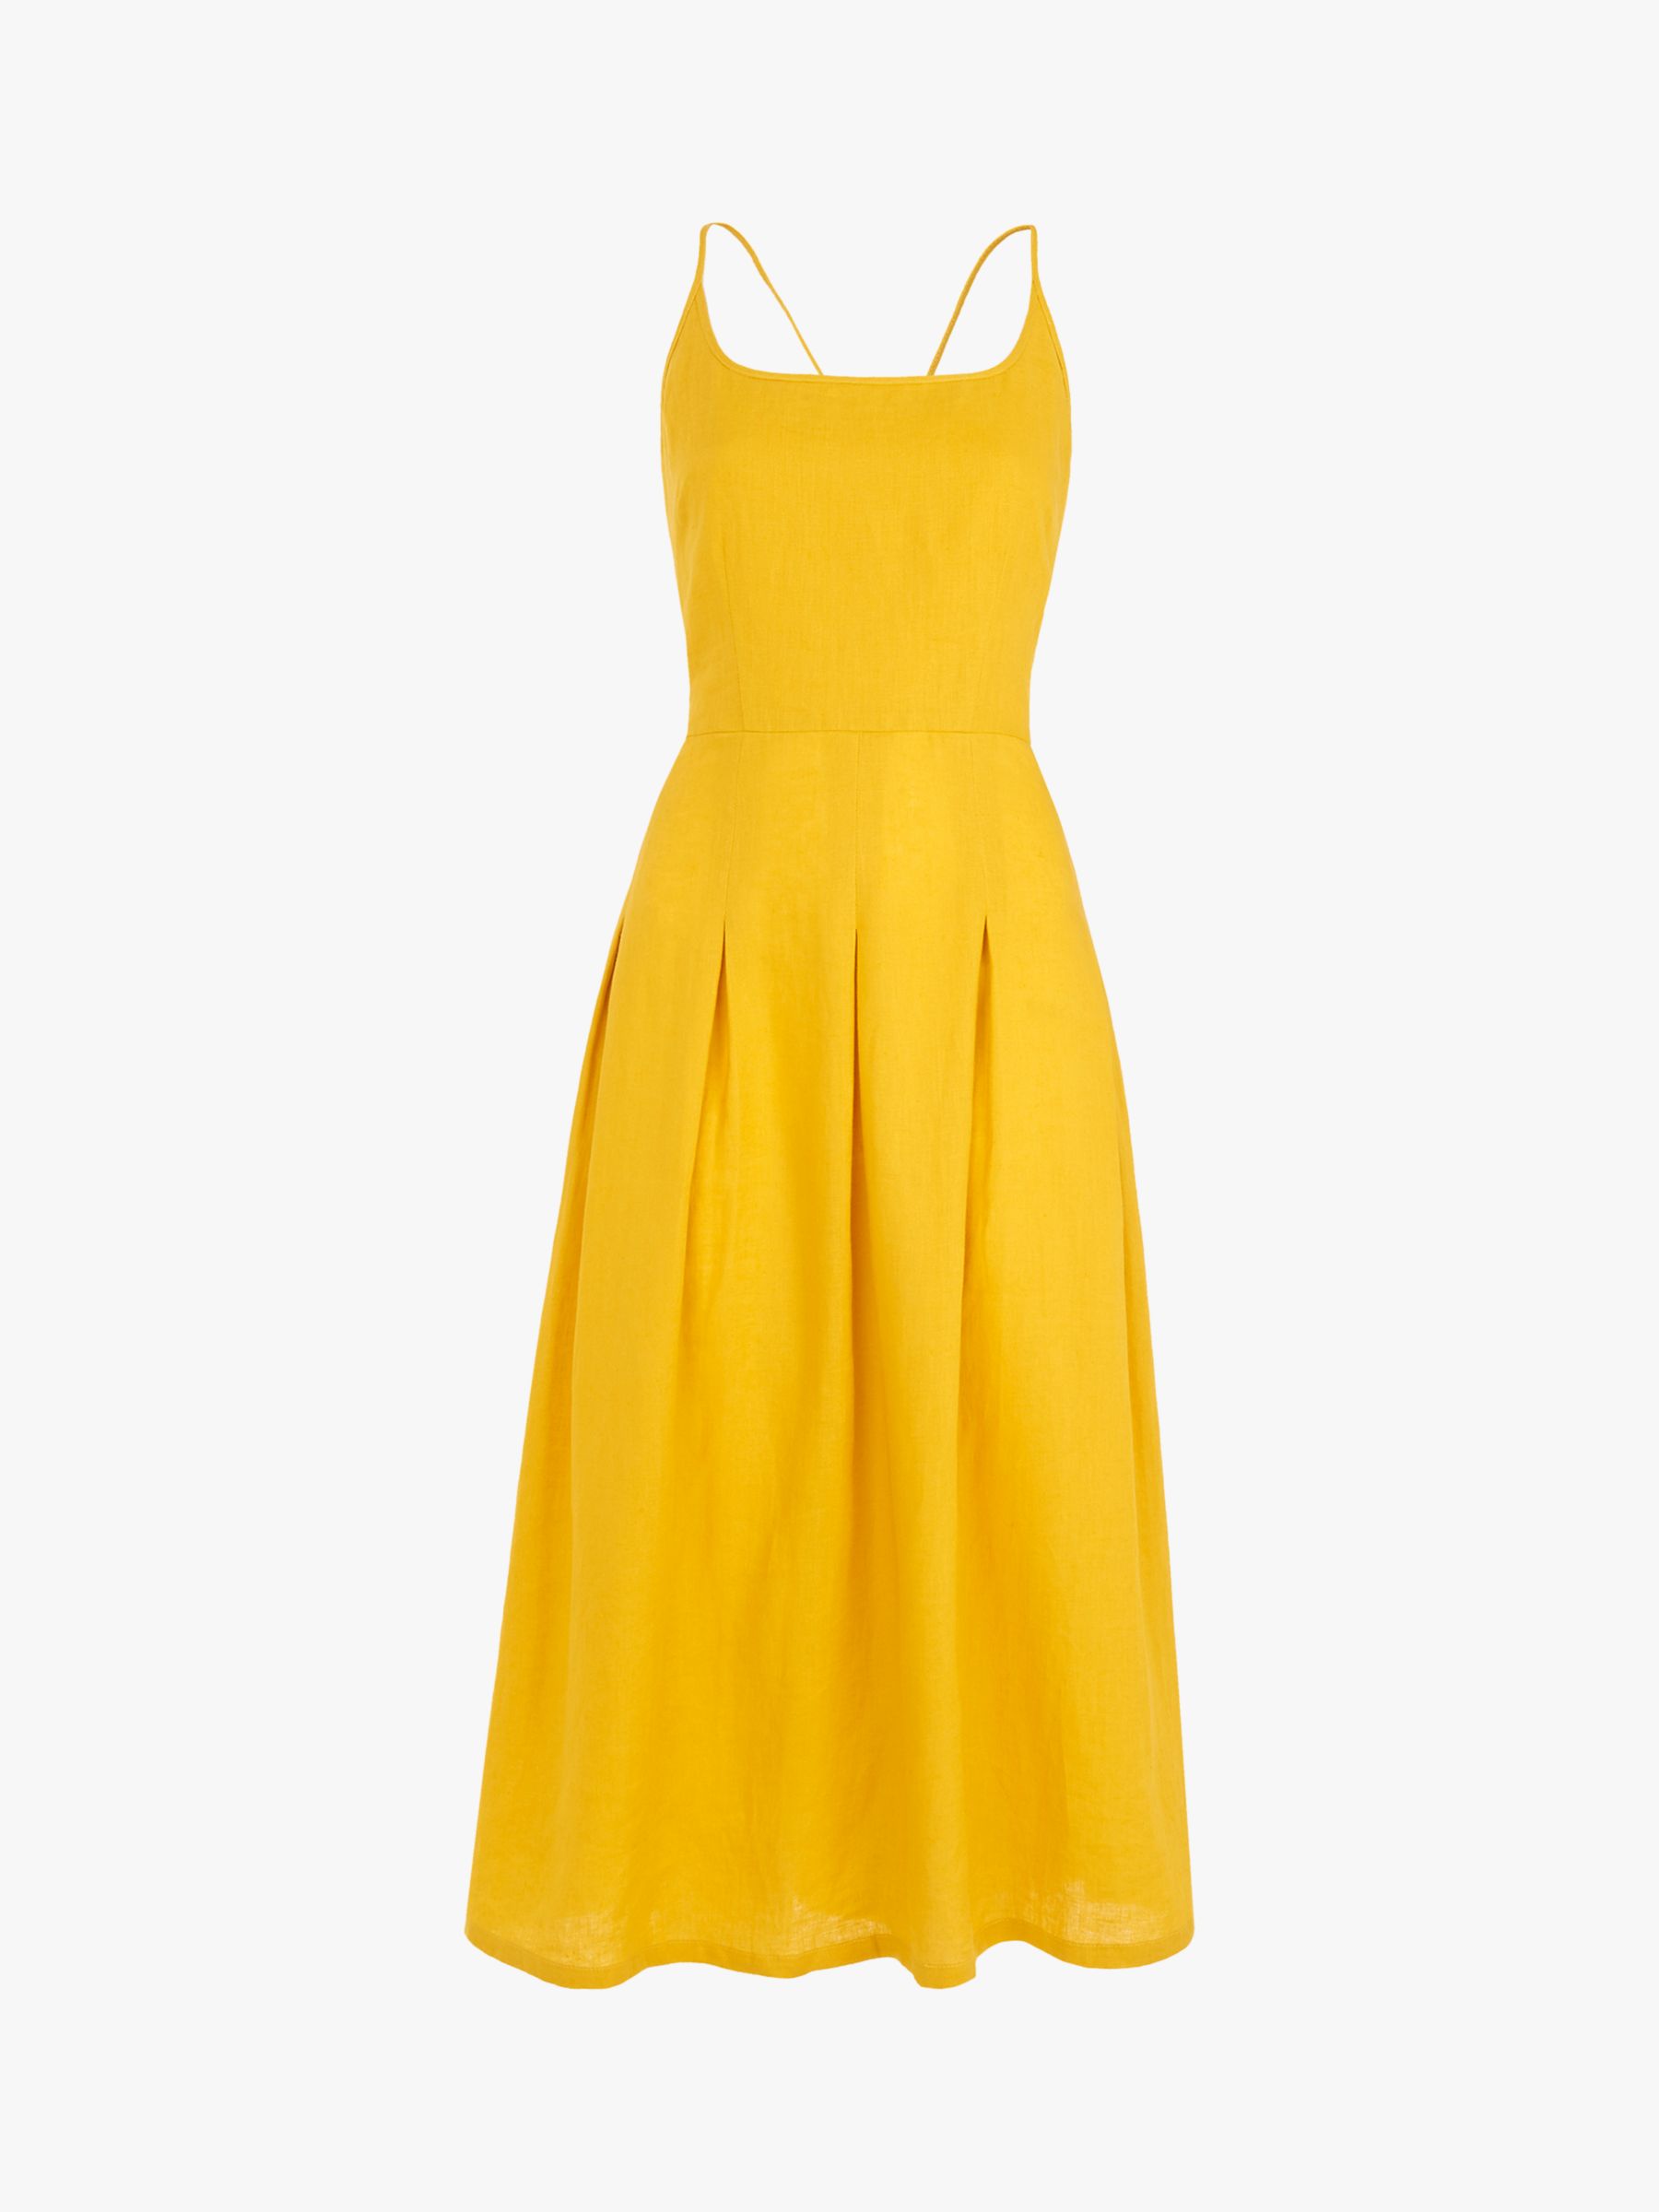 Whistles Duffy Linen Strappy Dress, Yellow